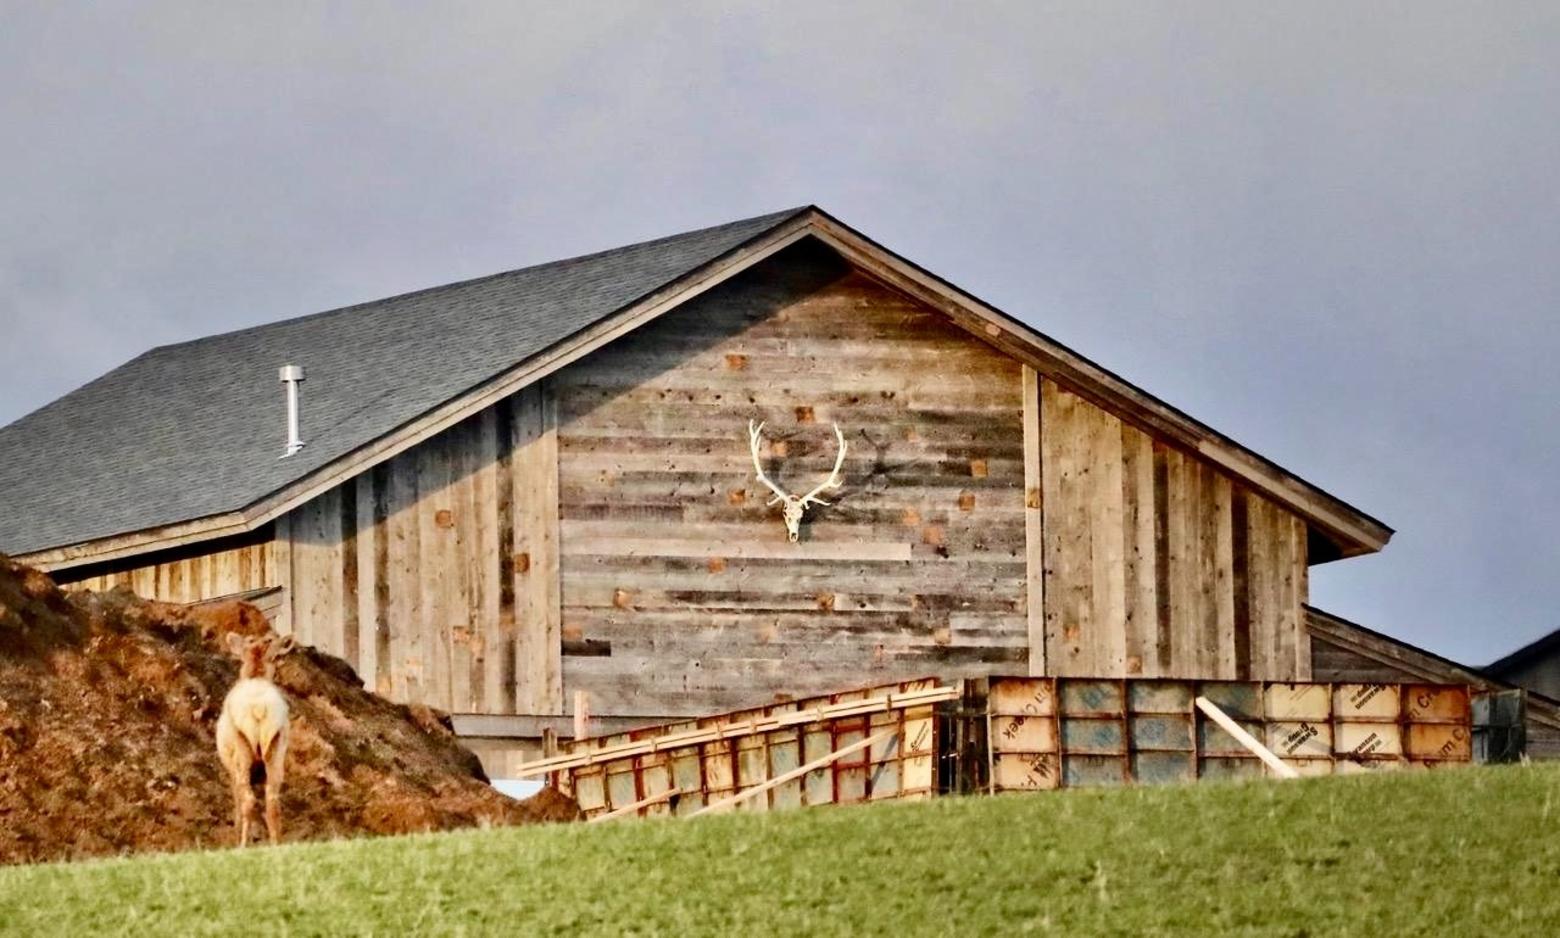 Trophy on a trophy home: in the Gallatin Valley, an elk returns to its former winter range and calving grounds only to find its habitat occupied by a new human residence rising from some of the most fertile soil in Montana. Photo courtesy Holly Pippel